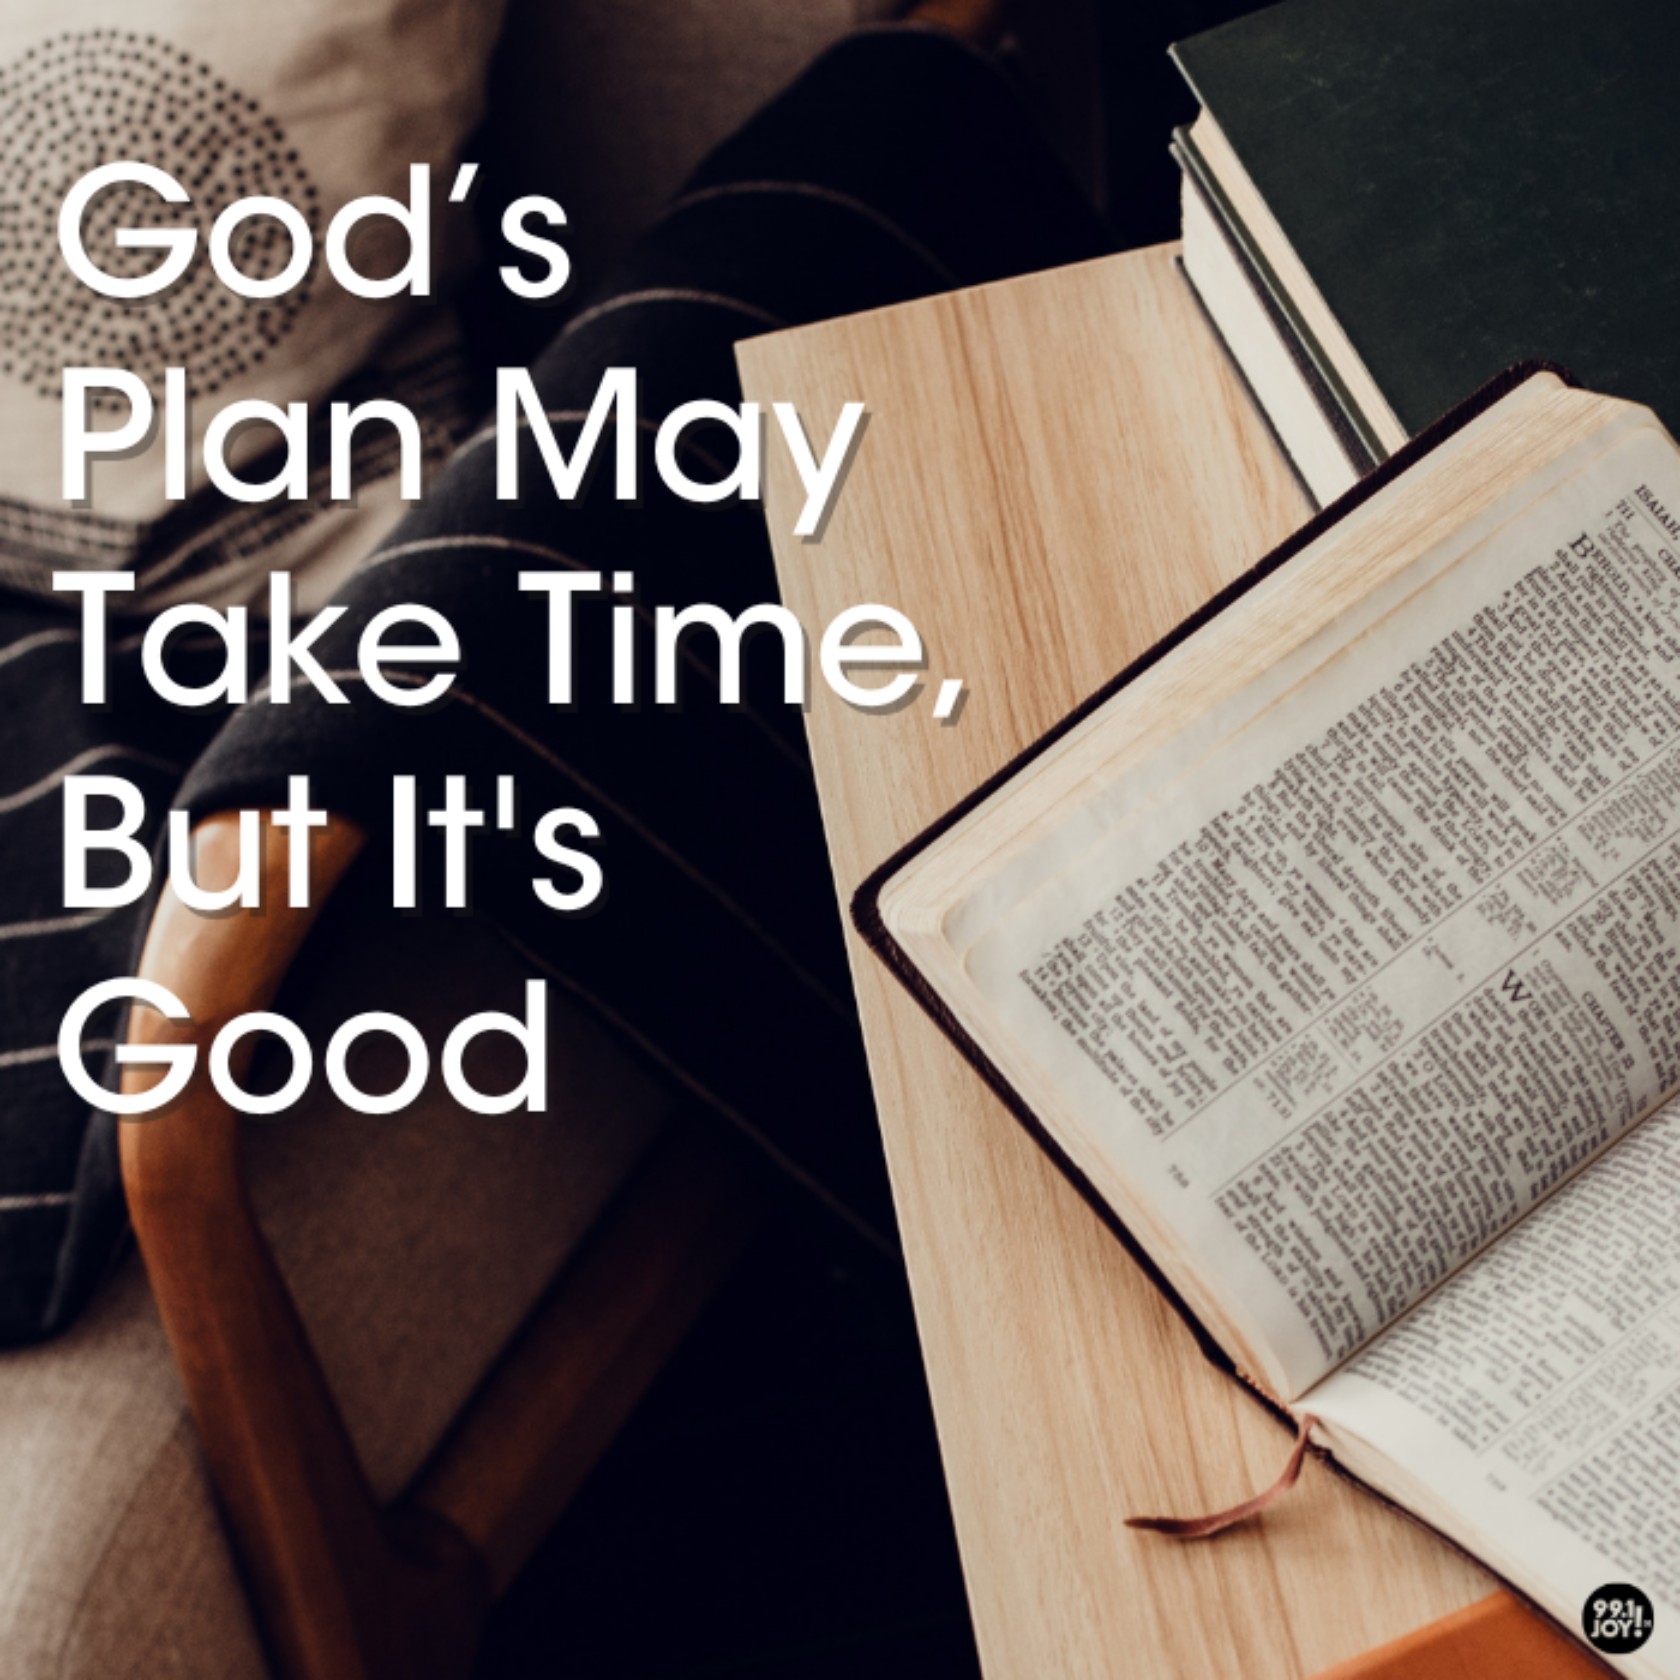 God’s Plan May Take Time, But It's Good